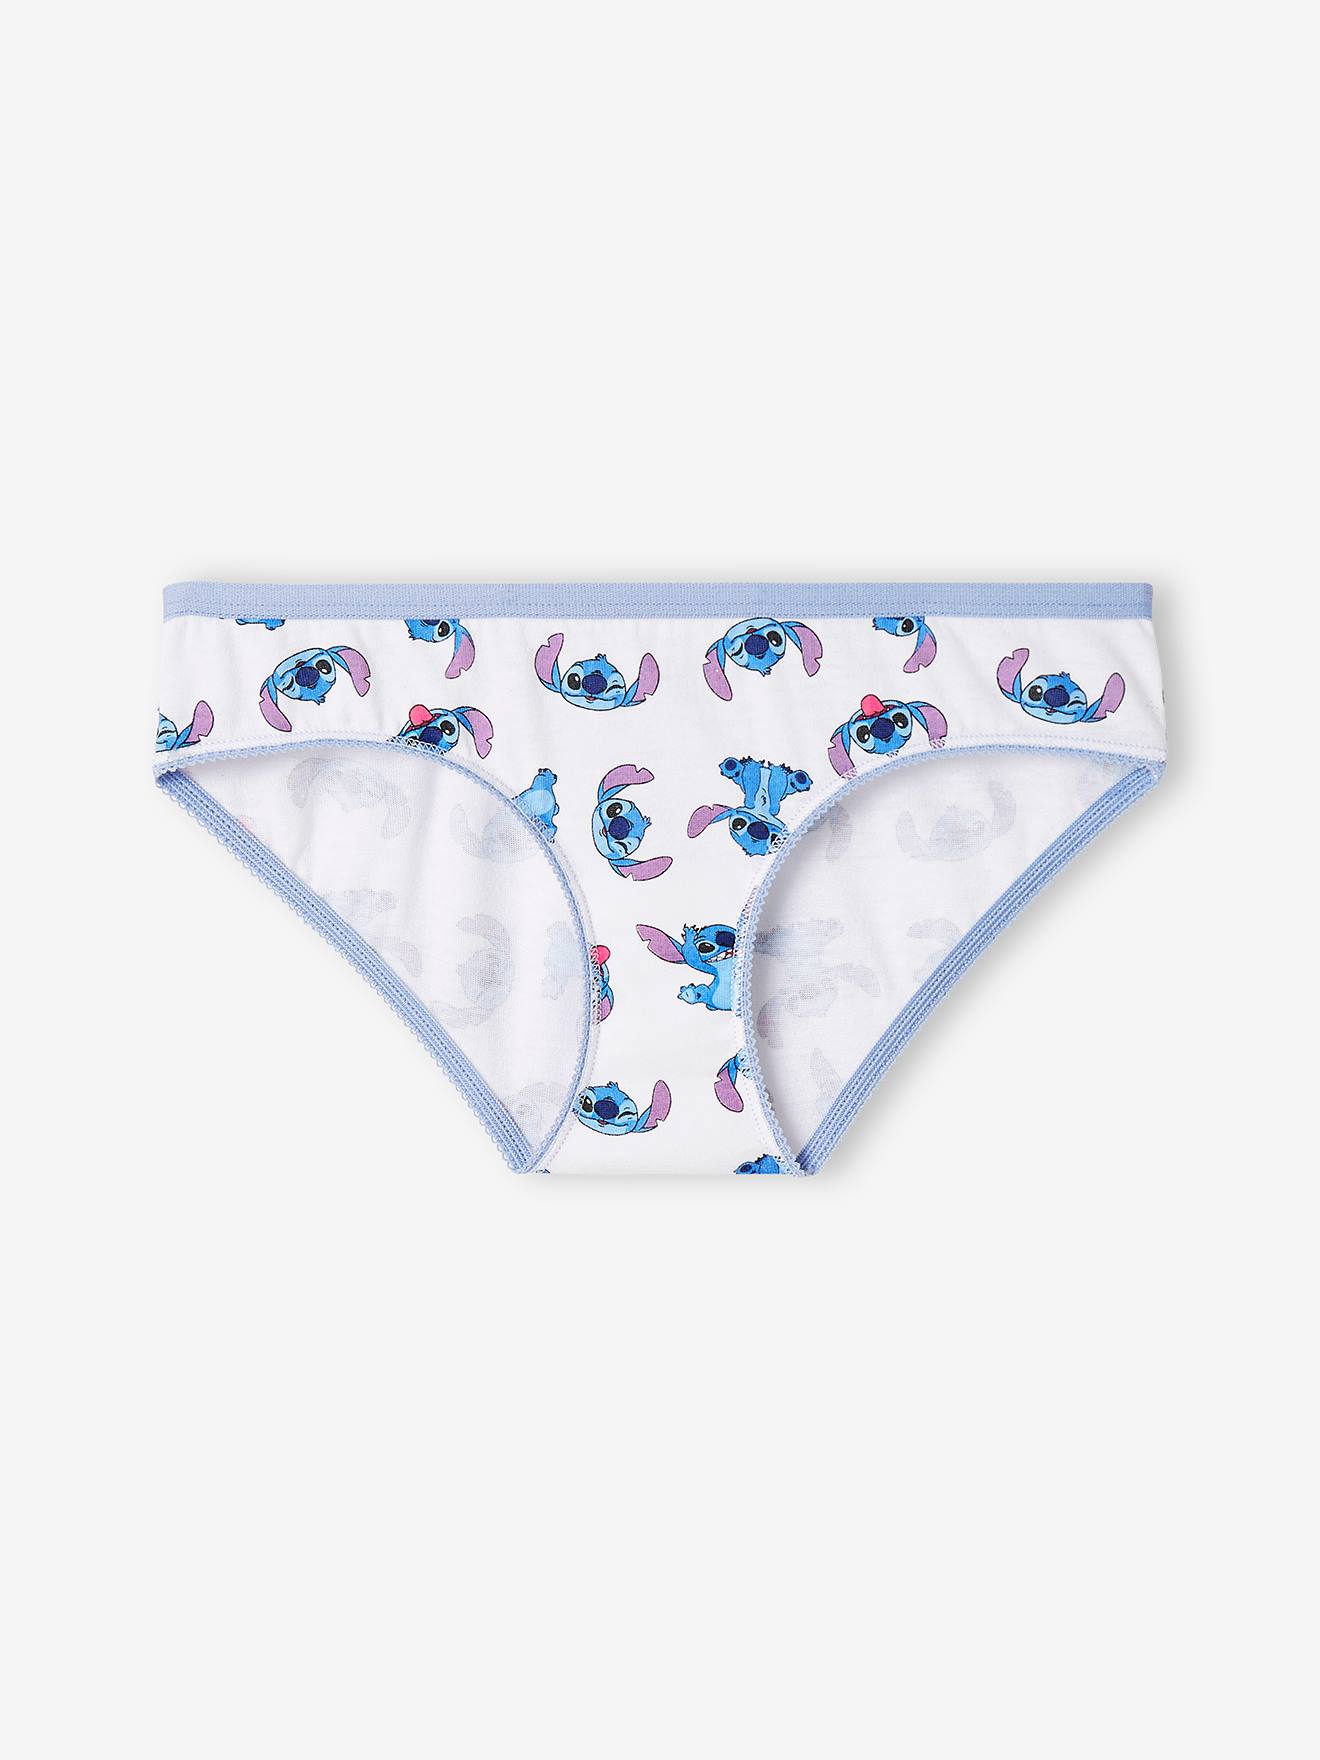 Pack of 3 Lilo & Stitch ©Disney hipster briefs - NEW IN - Girl - Kids 